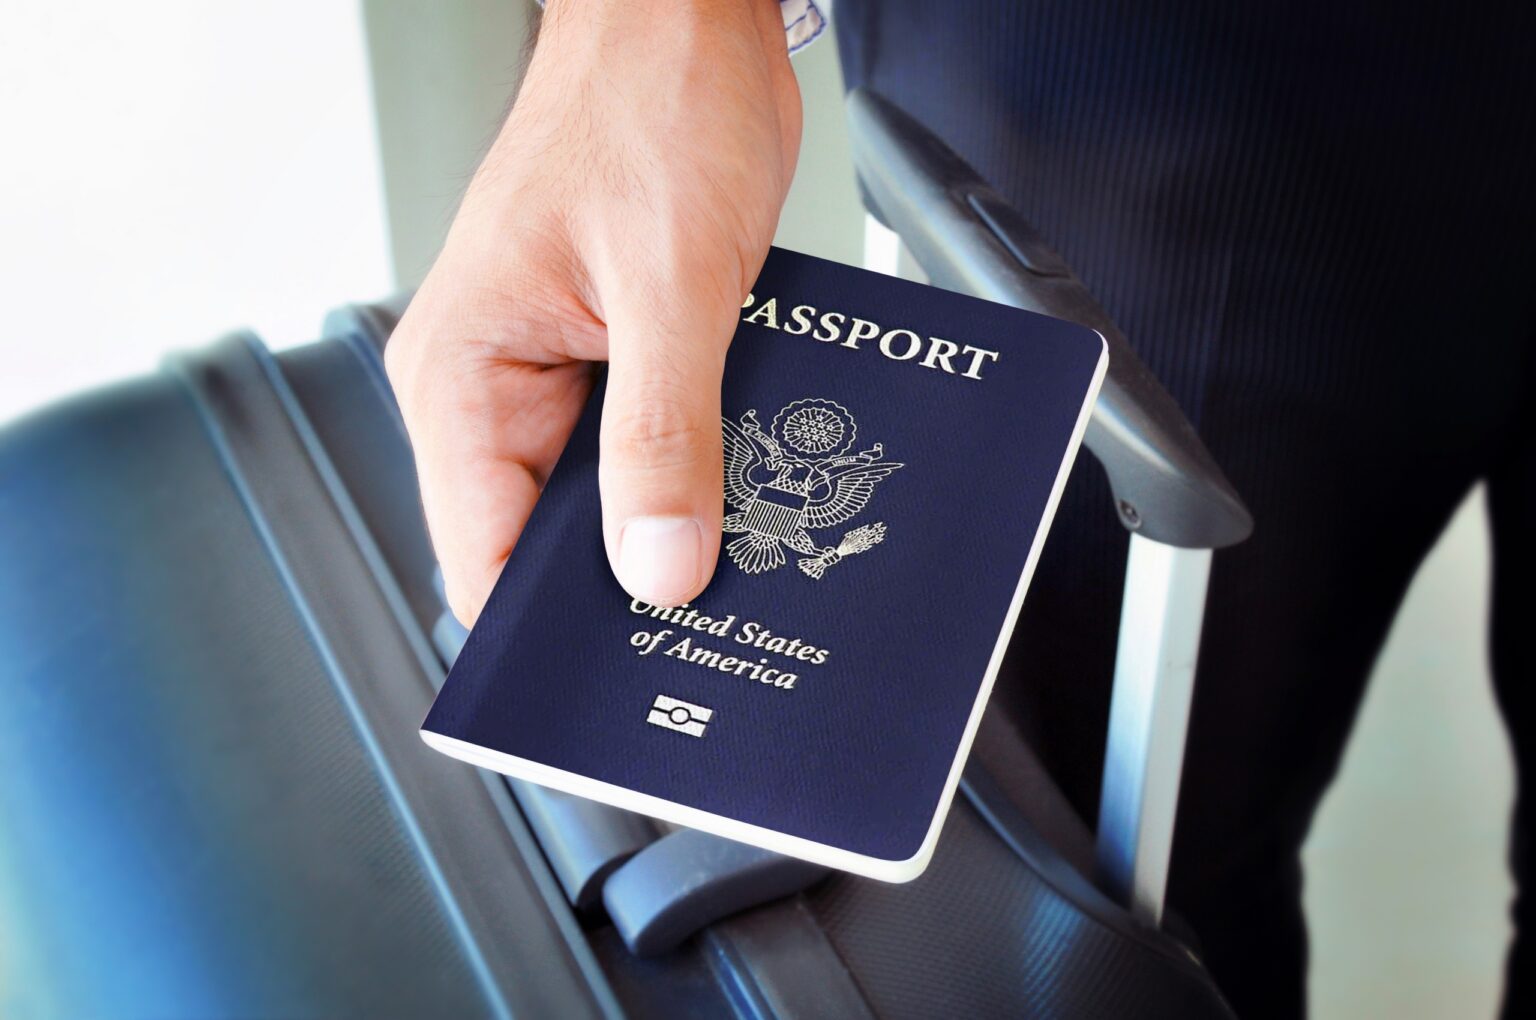 How to Apostille a Passport in the US?